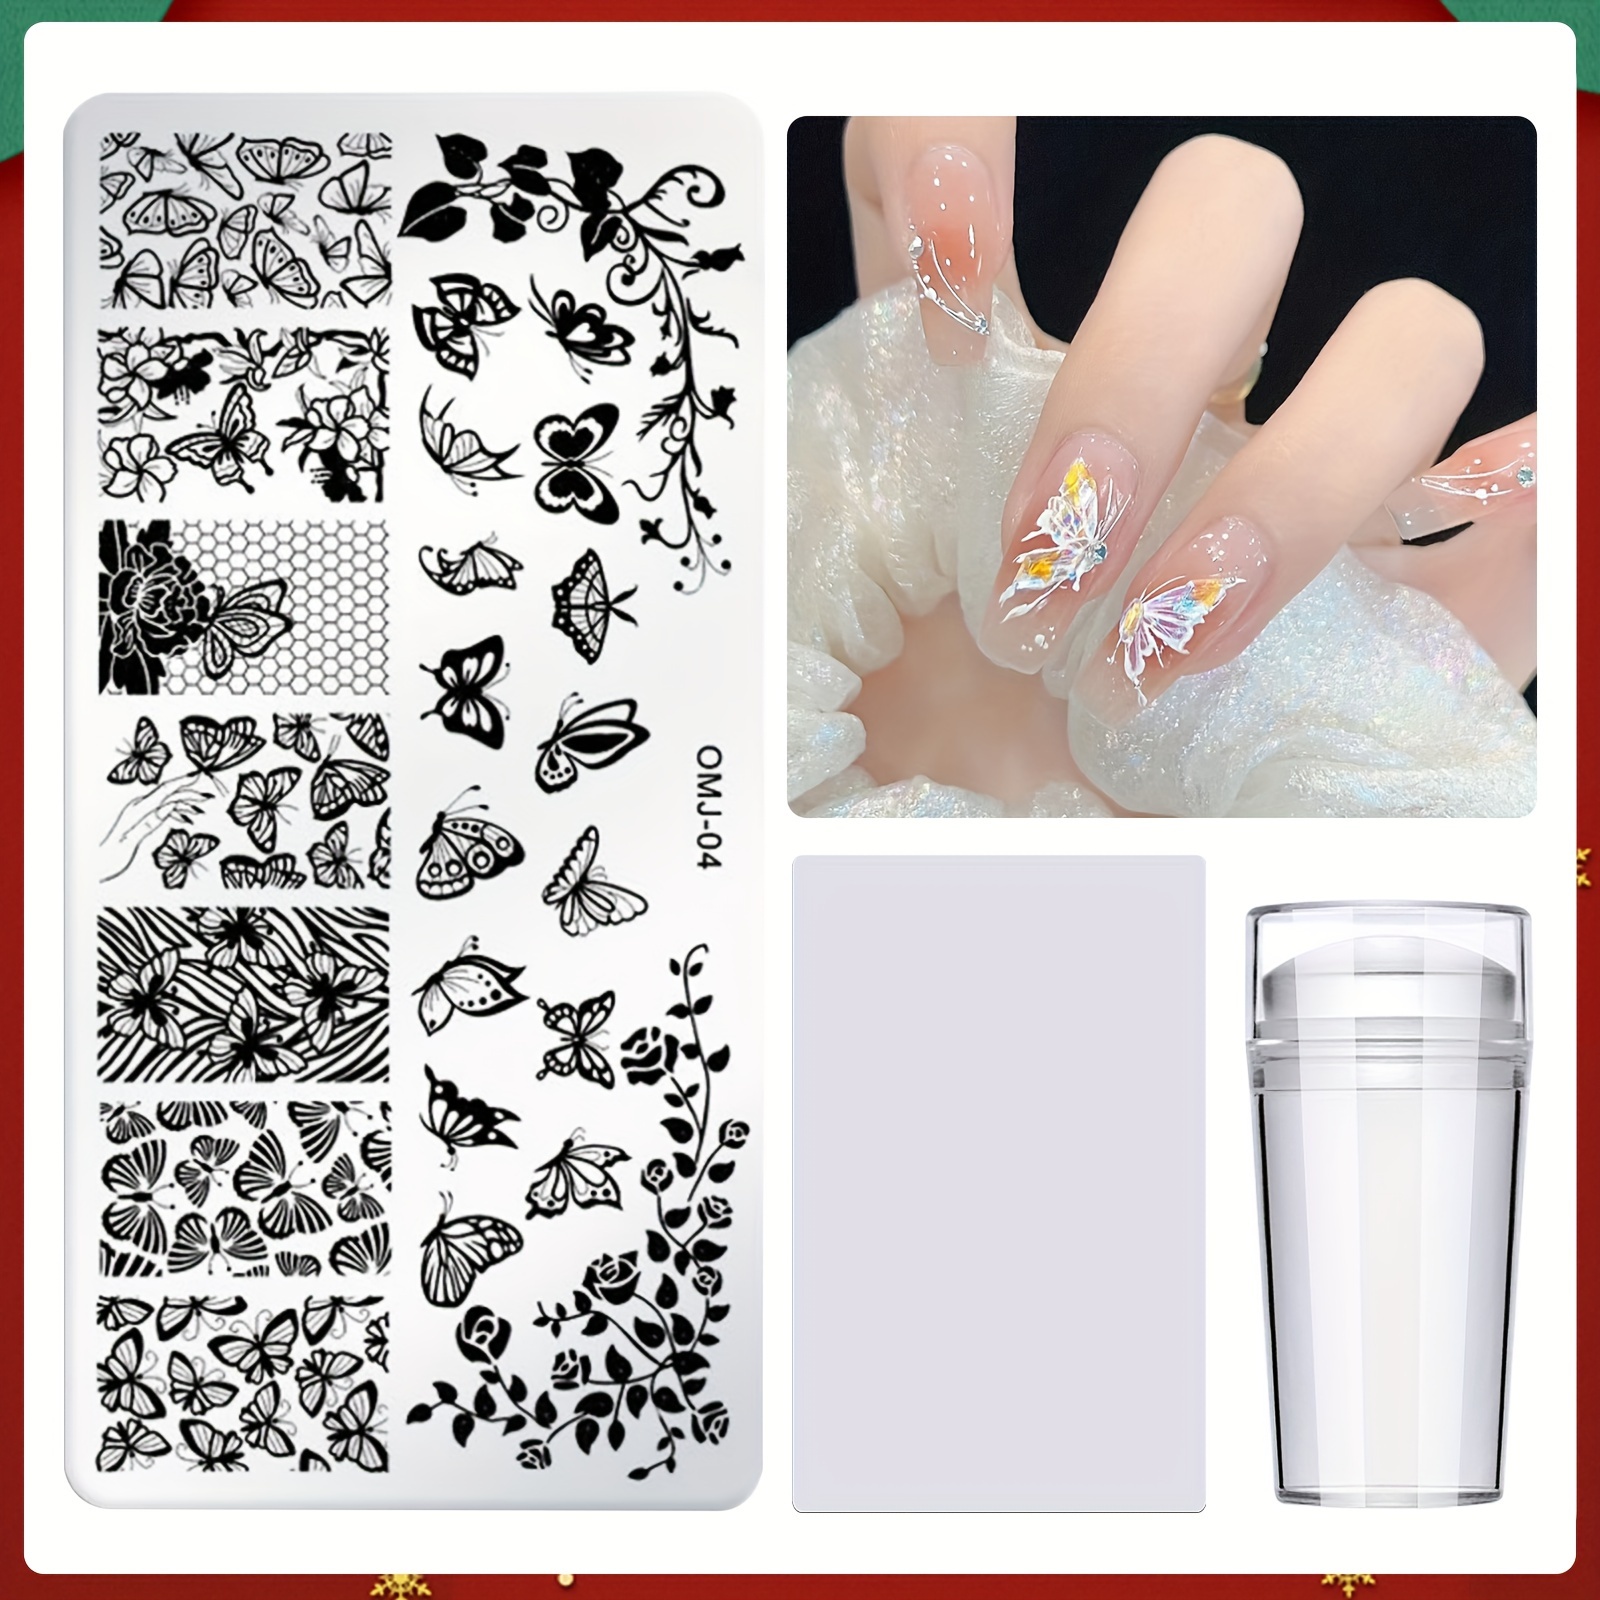 1860 Pieces French Tip Nail Guides, Self-Adhesive French V-Shaped Moon  Shaped Manicure Strip Stickers For Edge Auxiliary Black DIY Decoration  Stencil